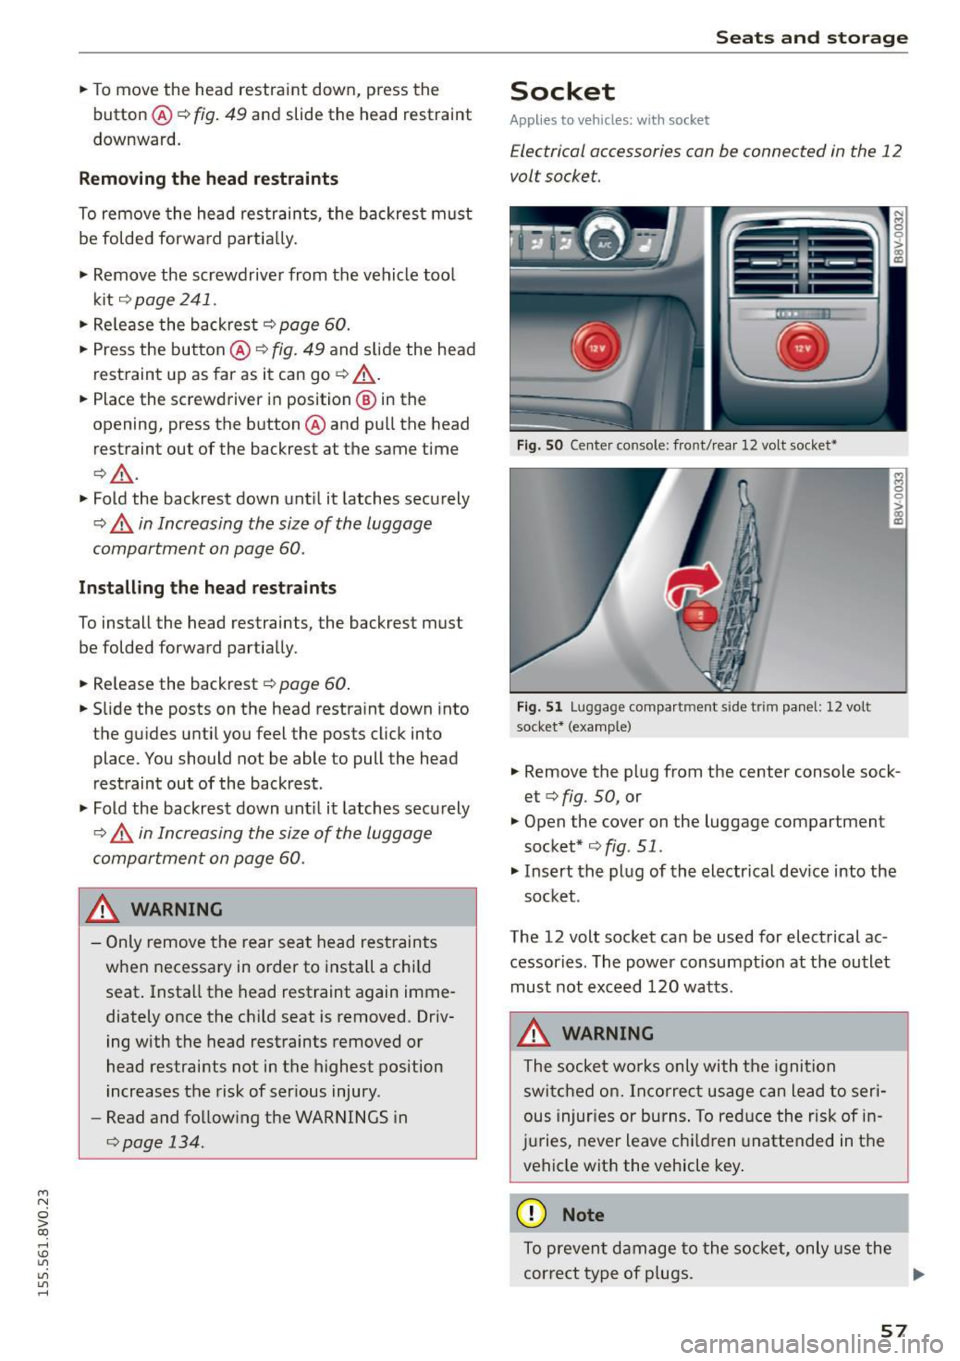 AUDI S3 SEDAN 2015  Owners Manual ...., 
N 
0 > co 
rl I.O 
" 
" 
" 
rl 
.. To  move  the  head  restraint  down,  press  the 
button ® 
<::>fig . 49 and  slide  the  head  restraint 
downward. 
Removing the  h ead restraints 
To 